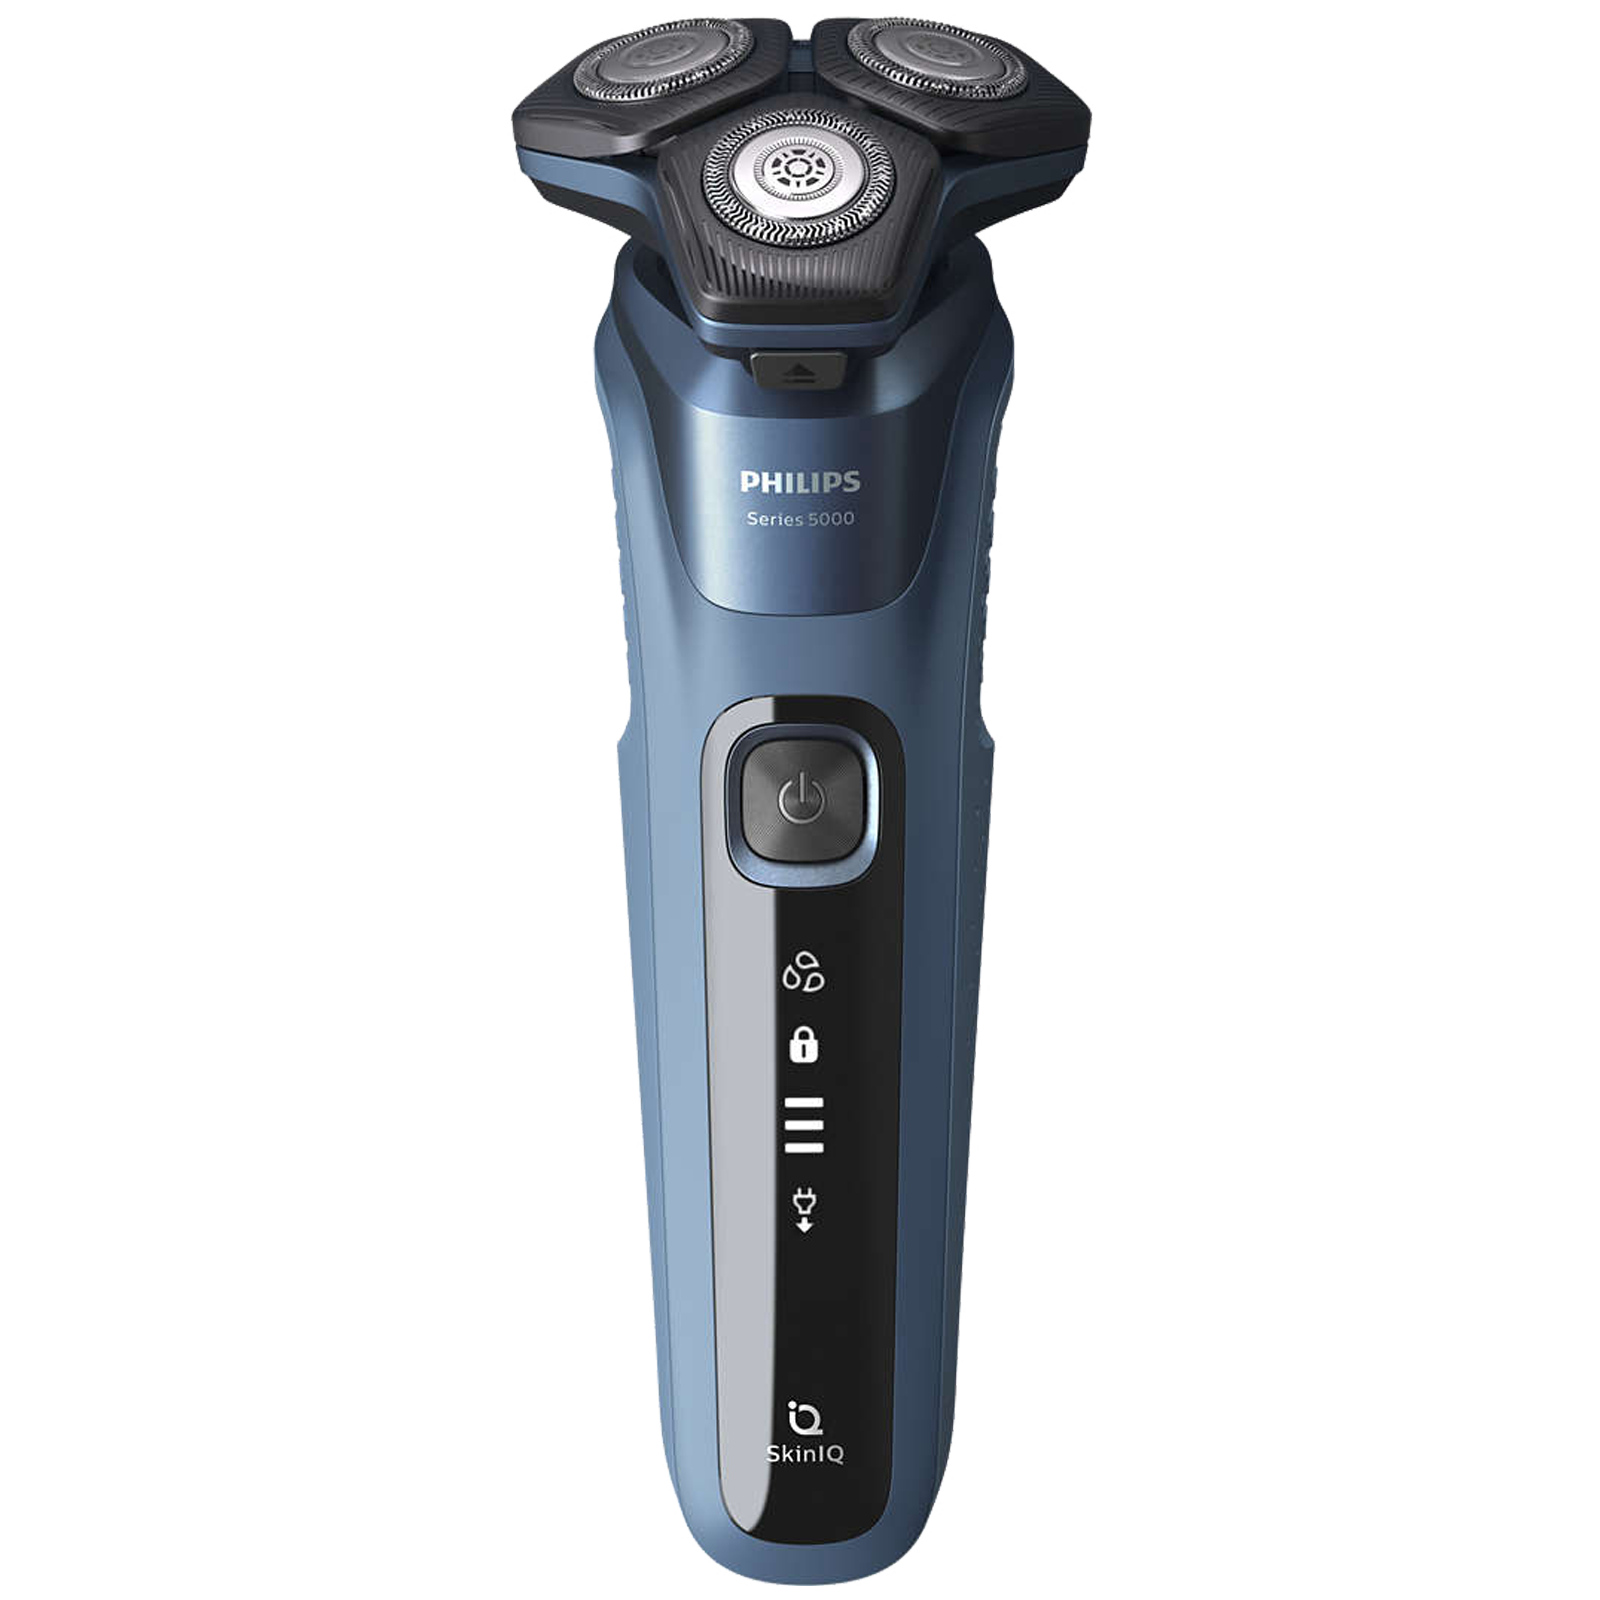 Philips Series 5000 Stainless Steel Blades Cordless Shaver (Travel Lock, S5582/20, Ocean Blue)_1